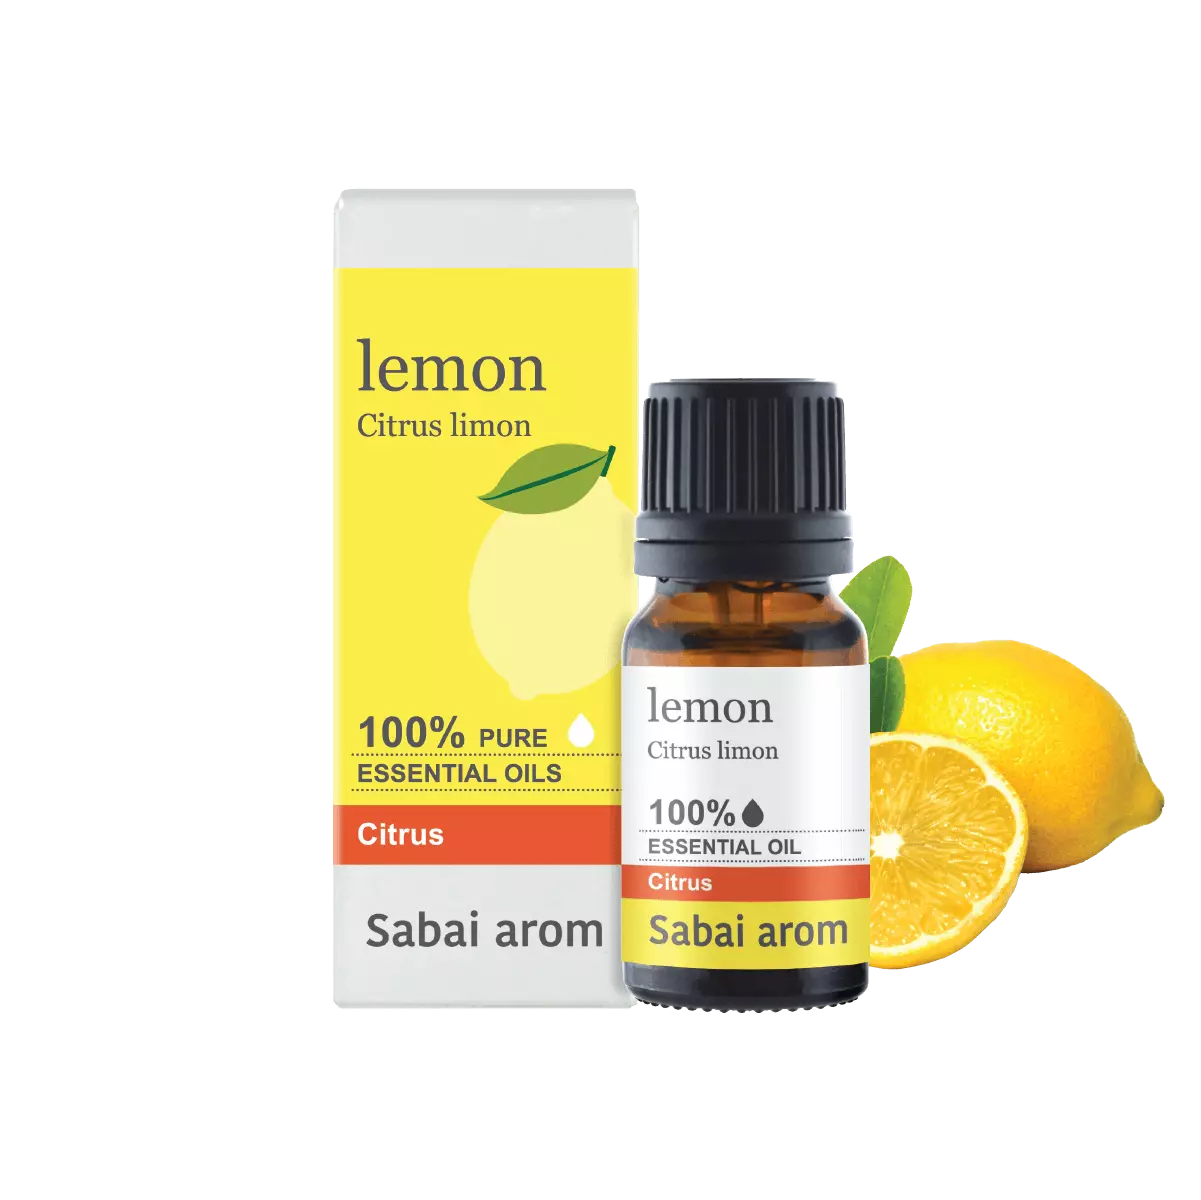 essential oil lemon <h2>100% Pure Essential Oil</h2> <em><strong>Citrus Limon</strong></em> <strong>Source : </strong>South Africa With its bright and cheerful aroma, Lemon essential oil benefits mental state by simultaneously adding positive energy to the exhausted and depressed mind. It dilutes negativity like a light that shine through the heart to expel darkness. If you are going through mental unclears like anxiety, despair and confusion, this lemony oil will take you away to somewhere more joyful, so that you can exercise your brain effectively for greater self-development. <strong>Scent : </strong>Fresh, strong lemony like Lemon peels <strong>Family : </strong>Citrus <strong>Note : </strong>Top